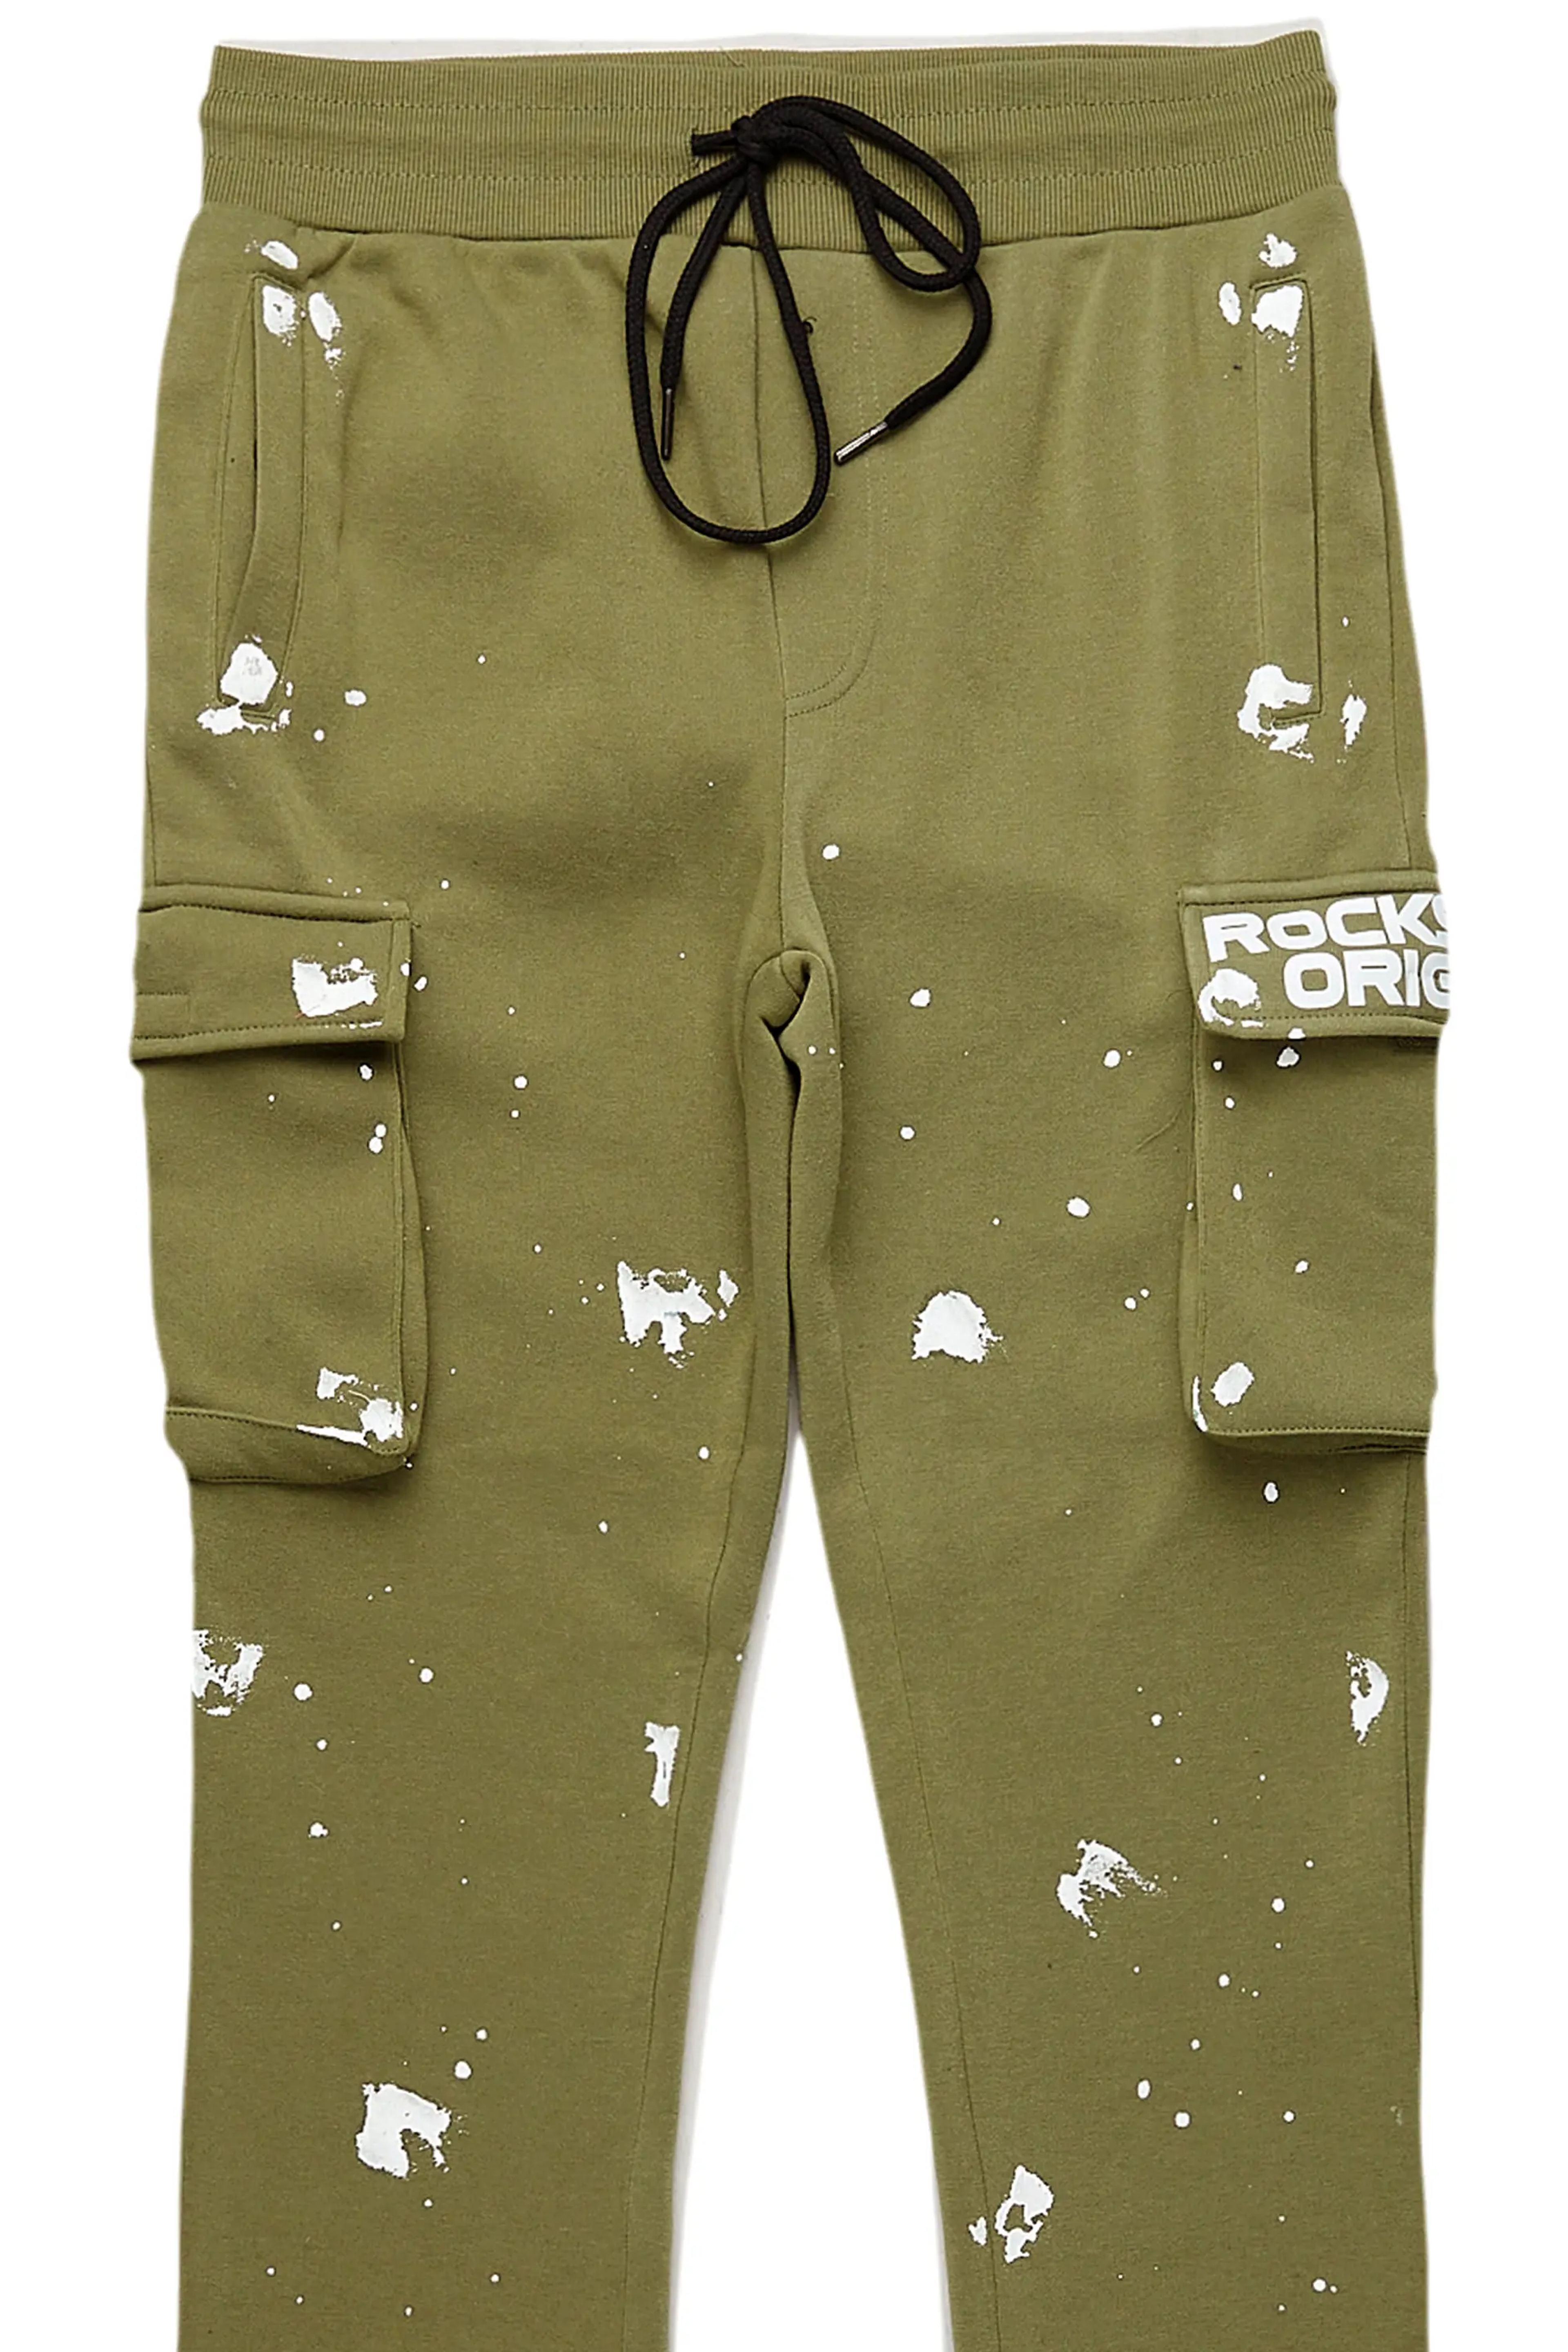 Alternate View 7 of Radko Olive Stacked Flare Cargo Pants